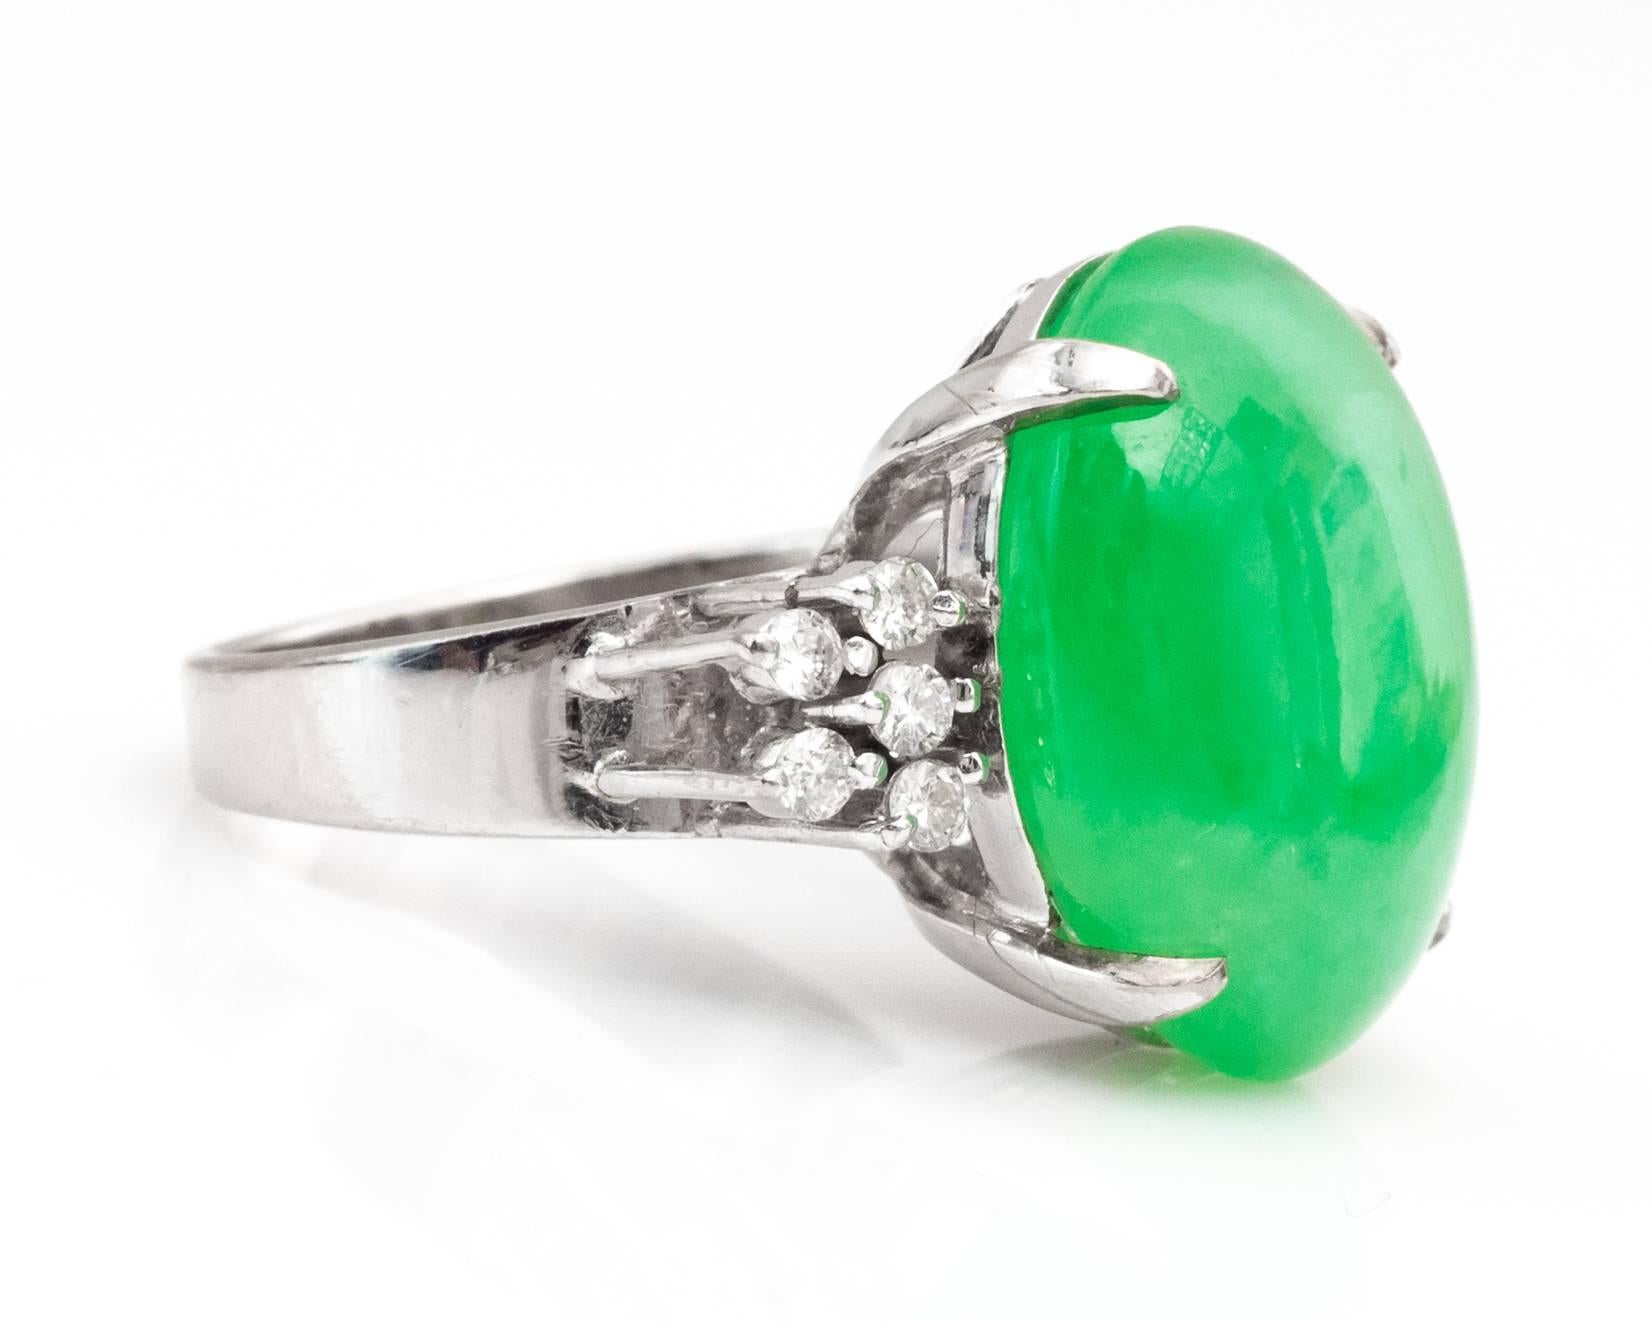 Gorgeous Jade Ring from the 1960s. 
Features an ornate size oval cut jade with accent sparkling diamonds on either side of the ring. Diamonds and Jade are all prong-set. The ring is crafted in 14 karat white gold. Hallmarked 585 on the inside of the